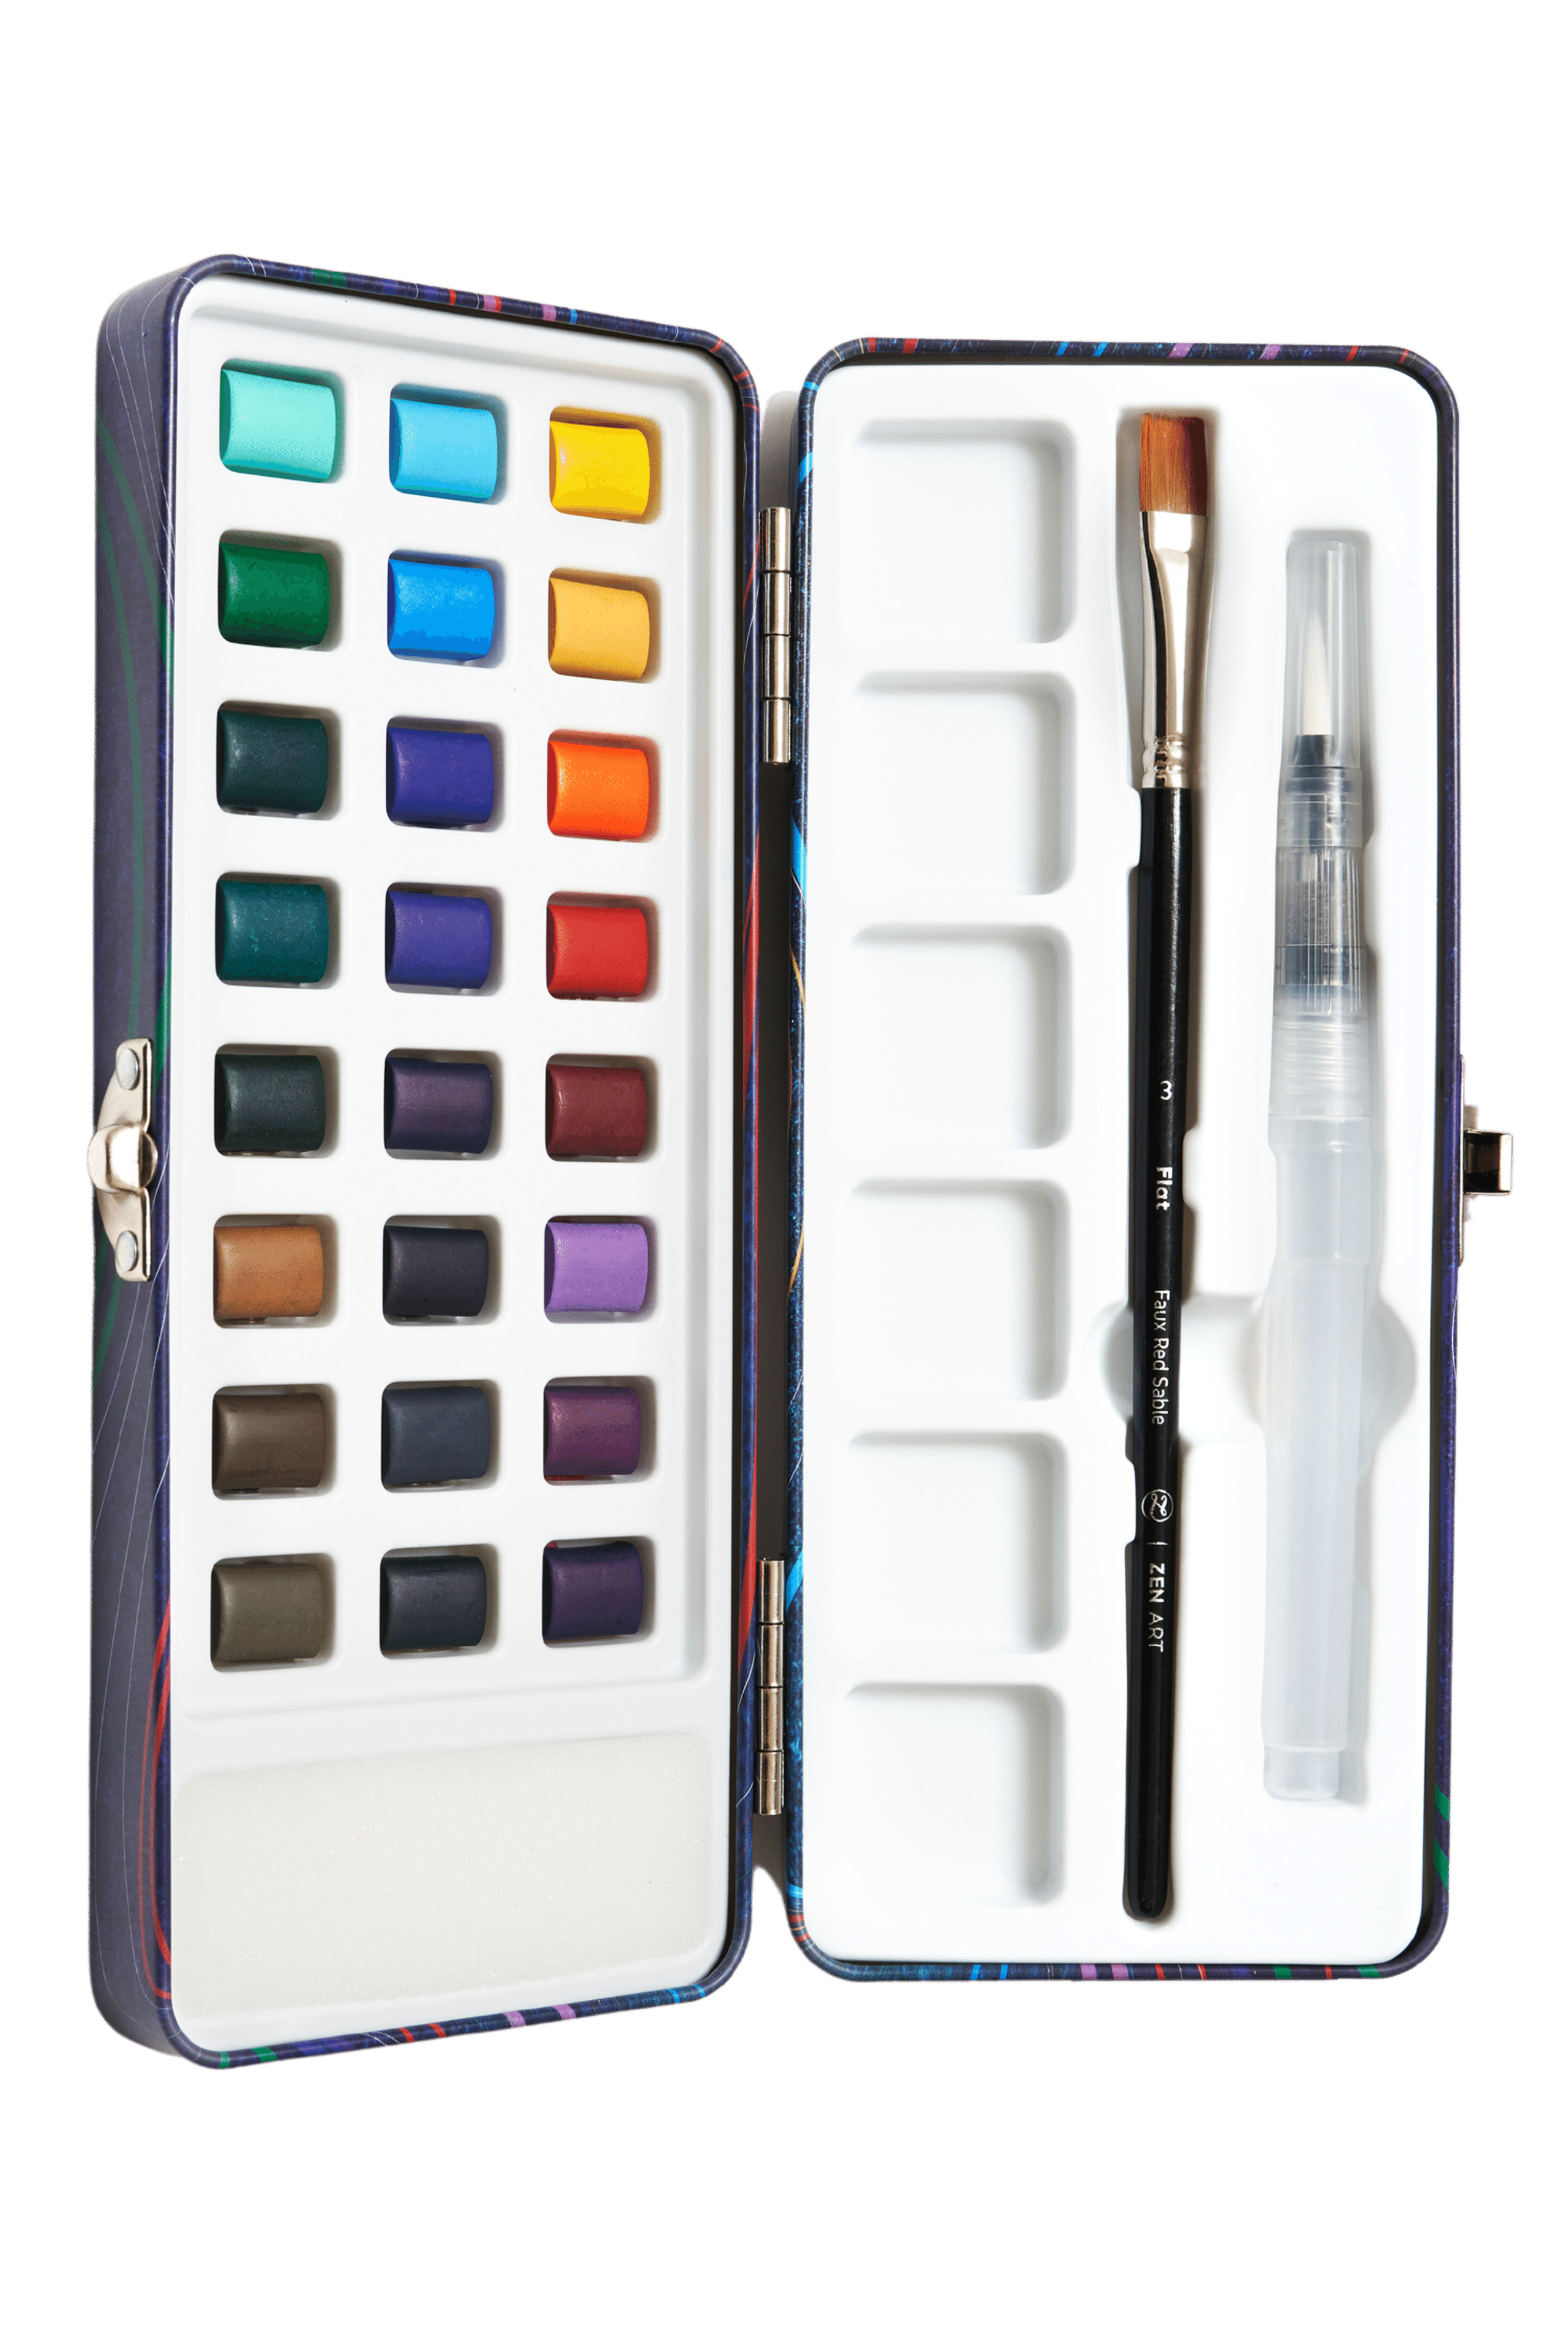 Mozart Supplies Watercolor Paint Essential Set - 24 Vibrant Colors - Lightweight and Portable - Perfect for Budding Hobbyists and Professional